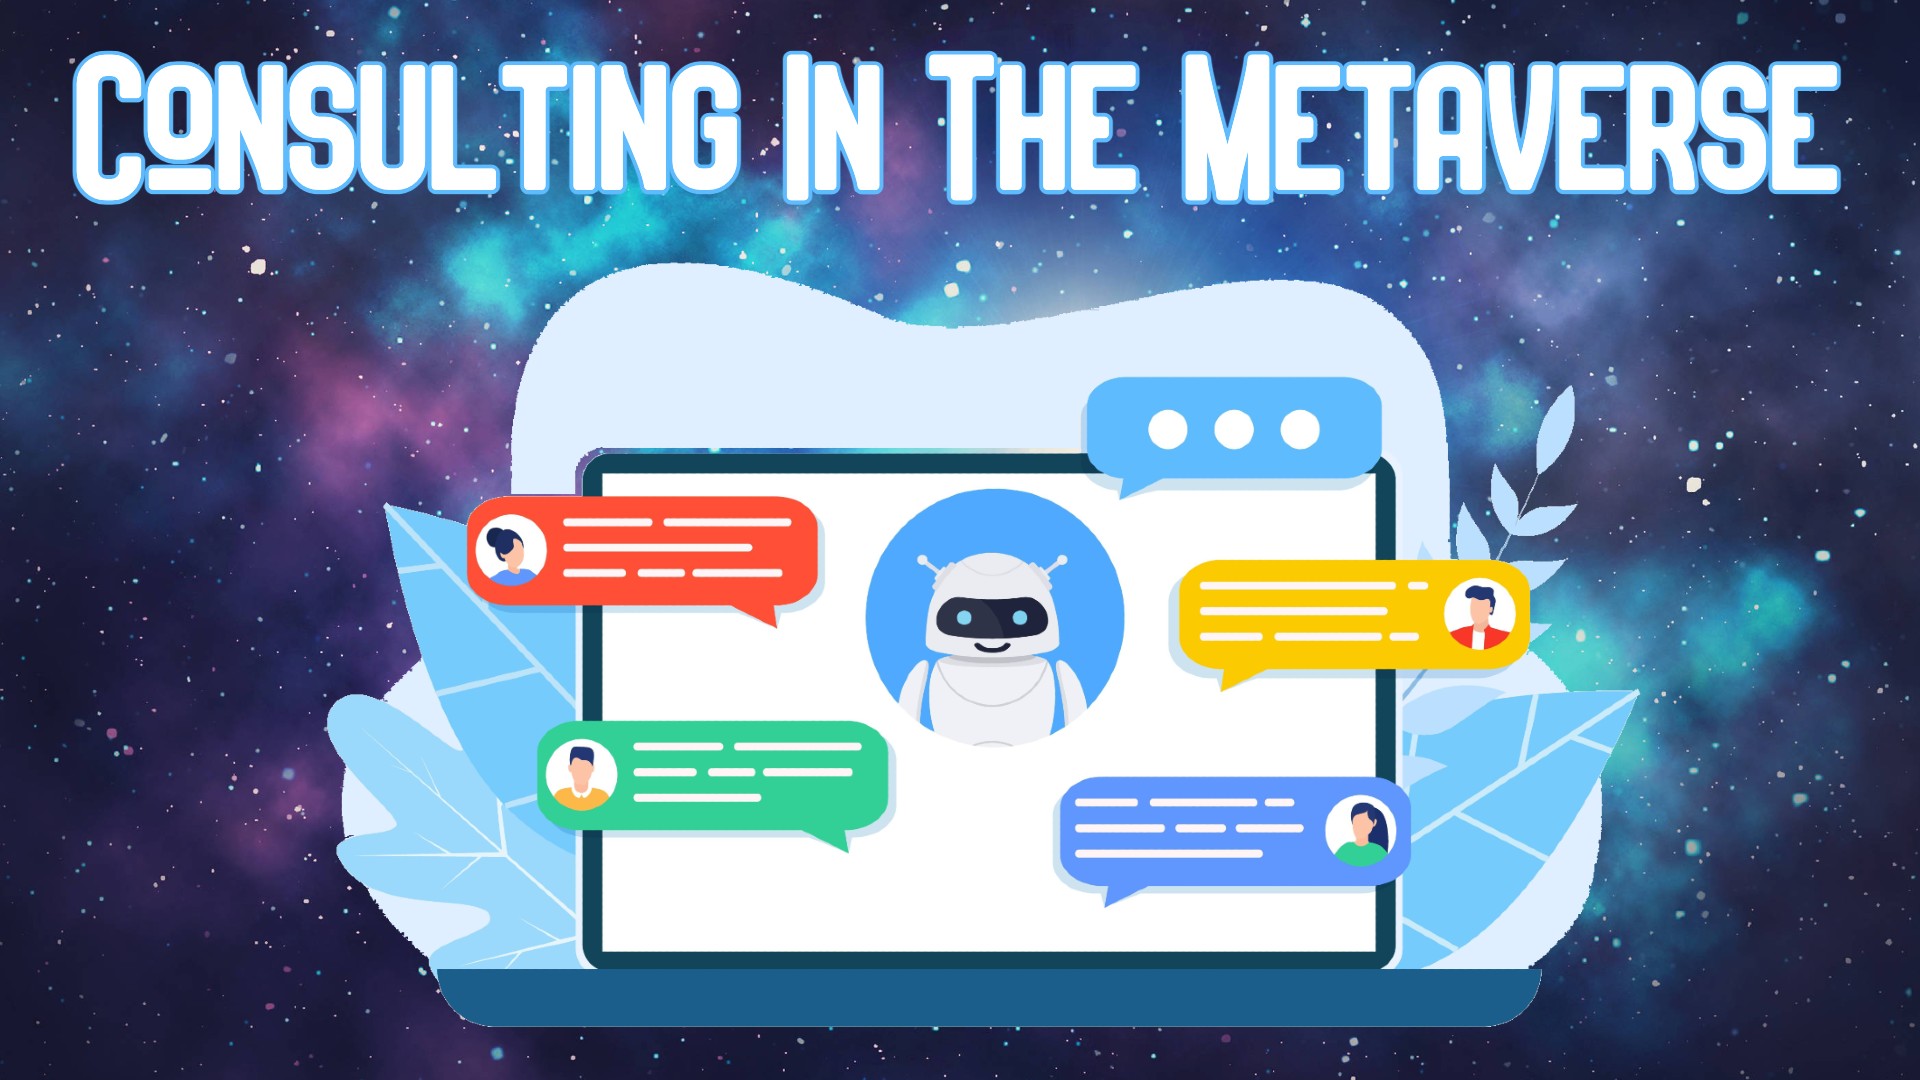 The Metaverse 114: Consulting in the Metaverse